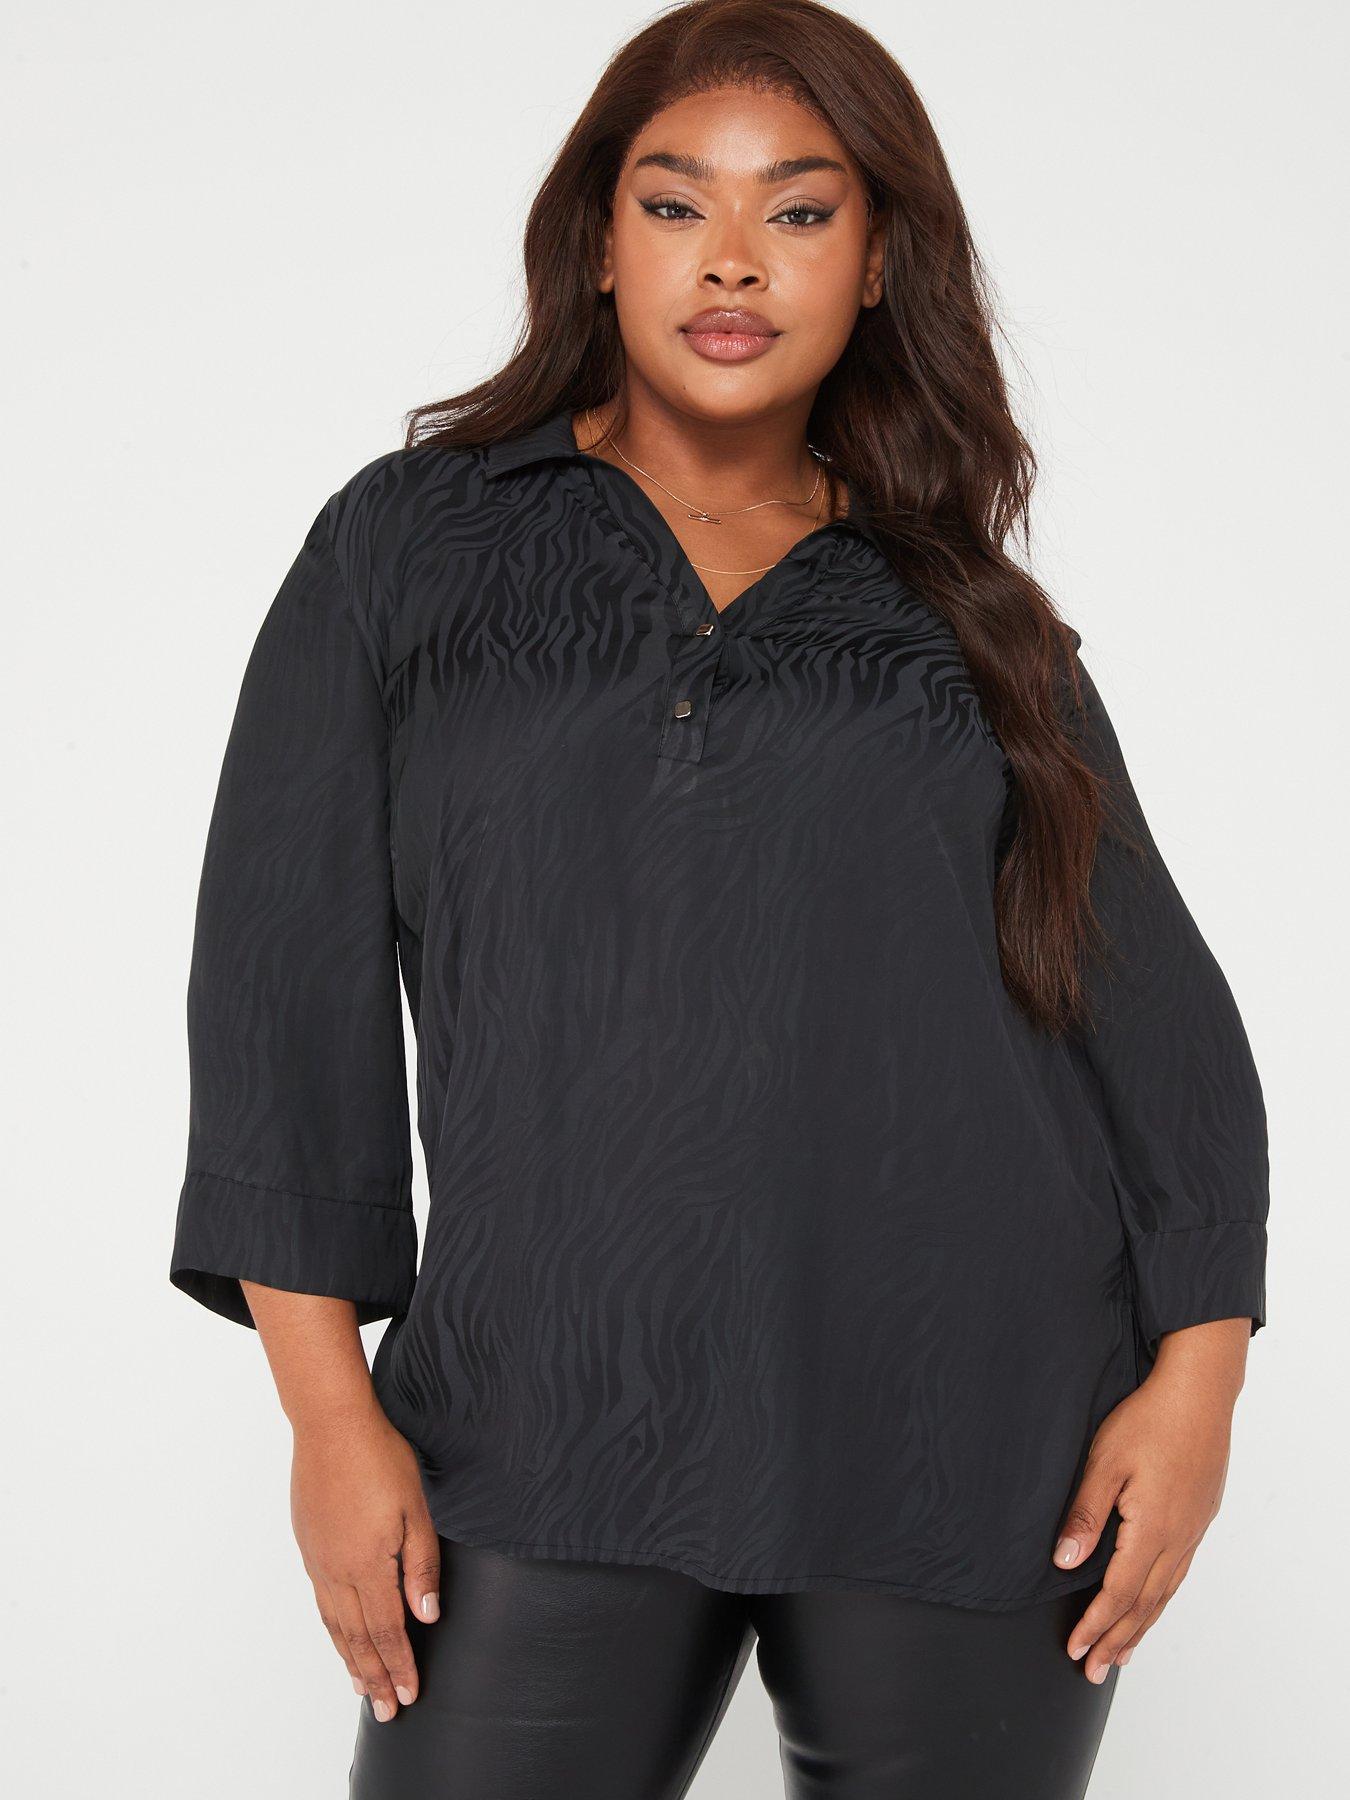 Yummie Tummie Plus-Sized Clothing On Sale Up To 90% Off Retail